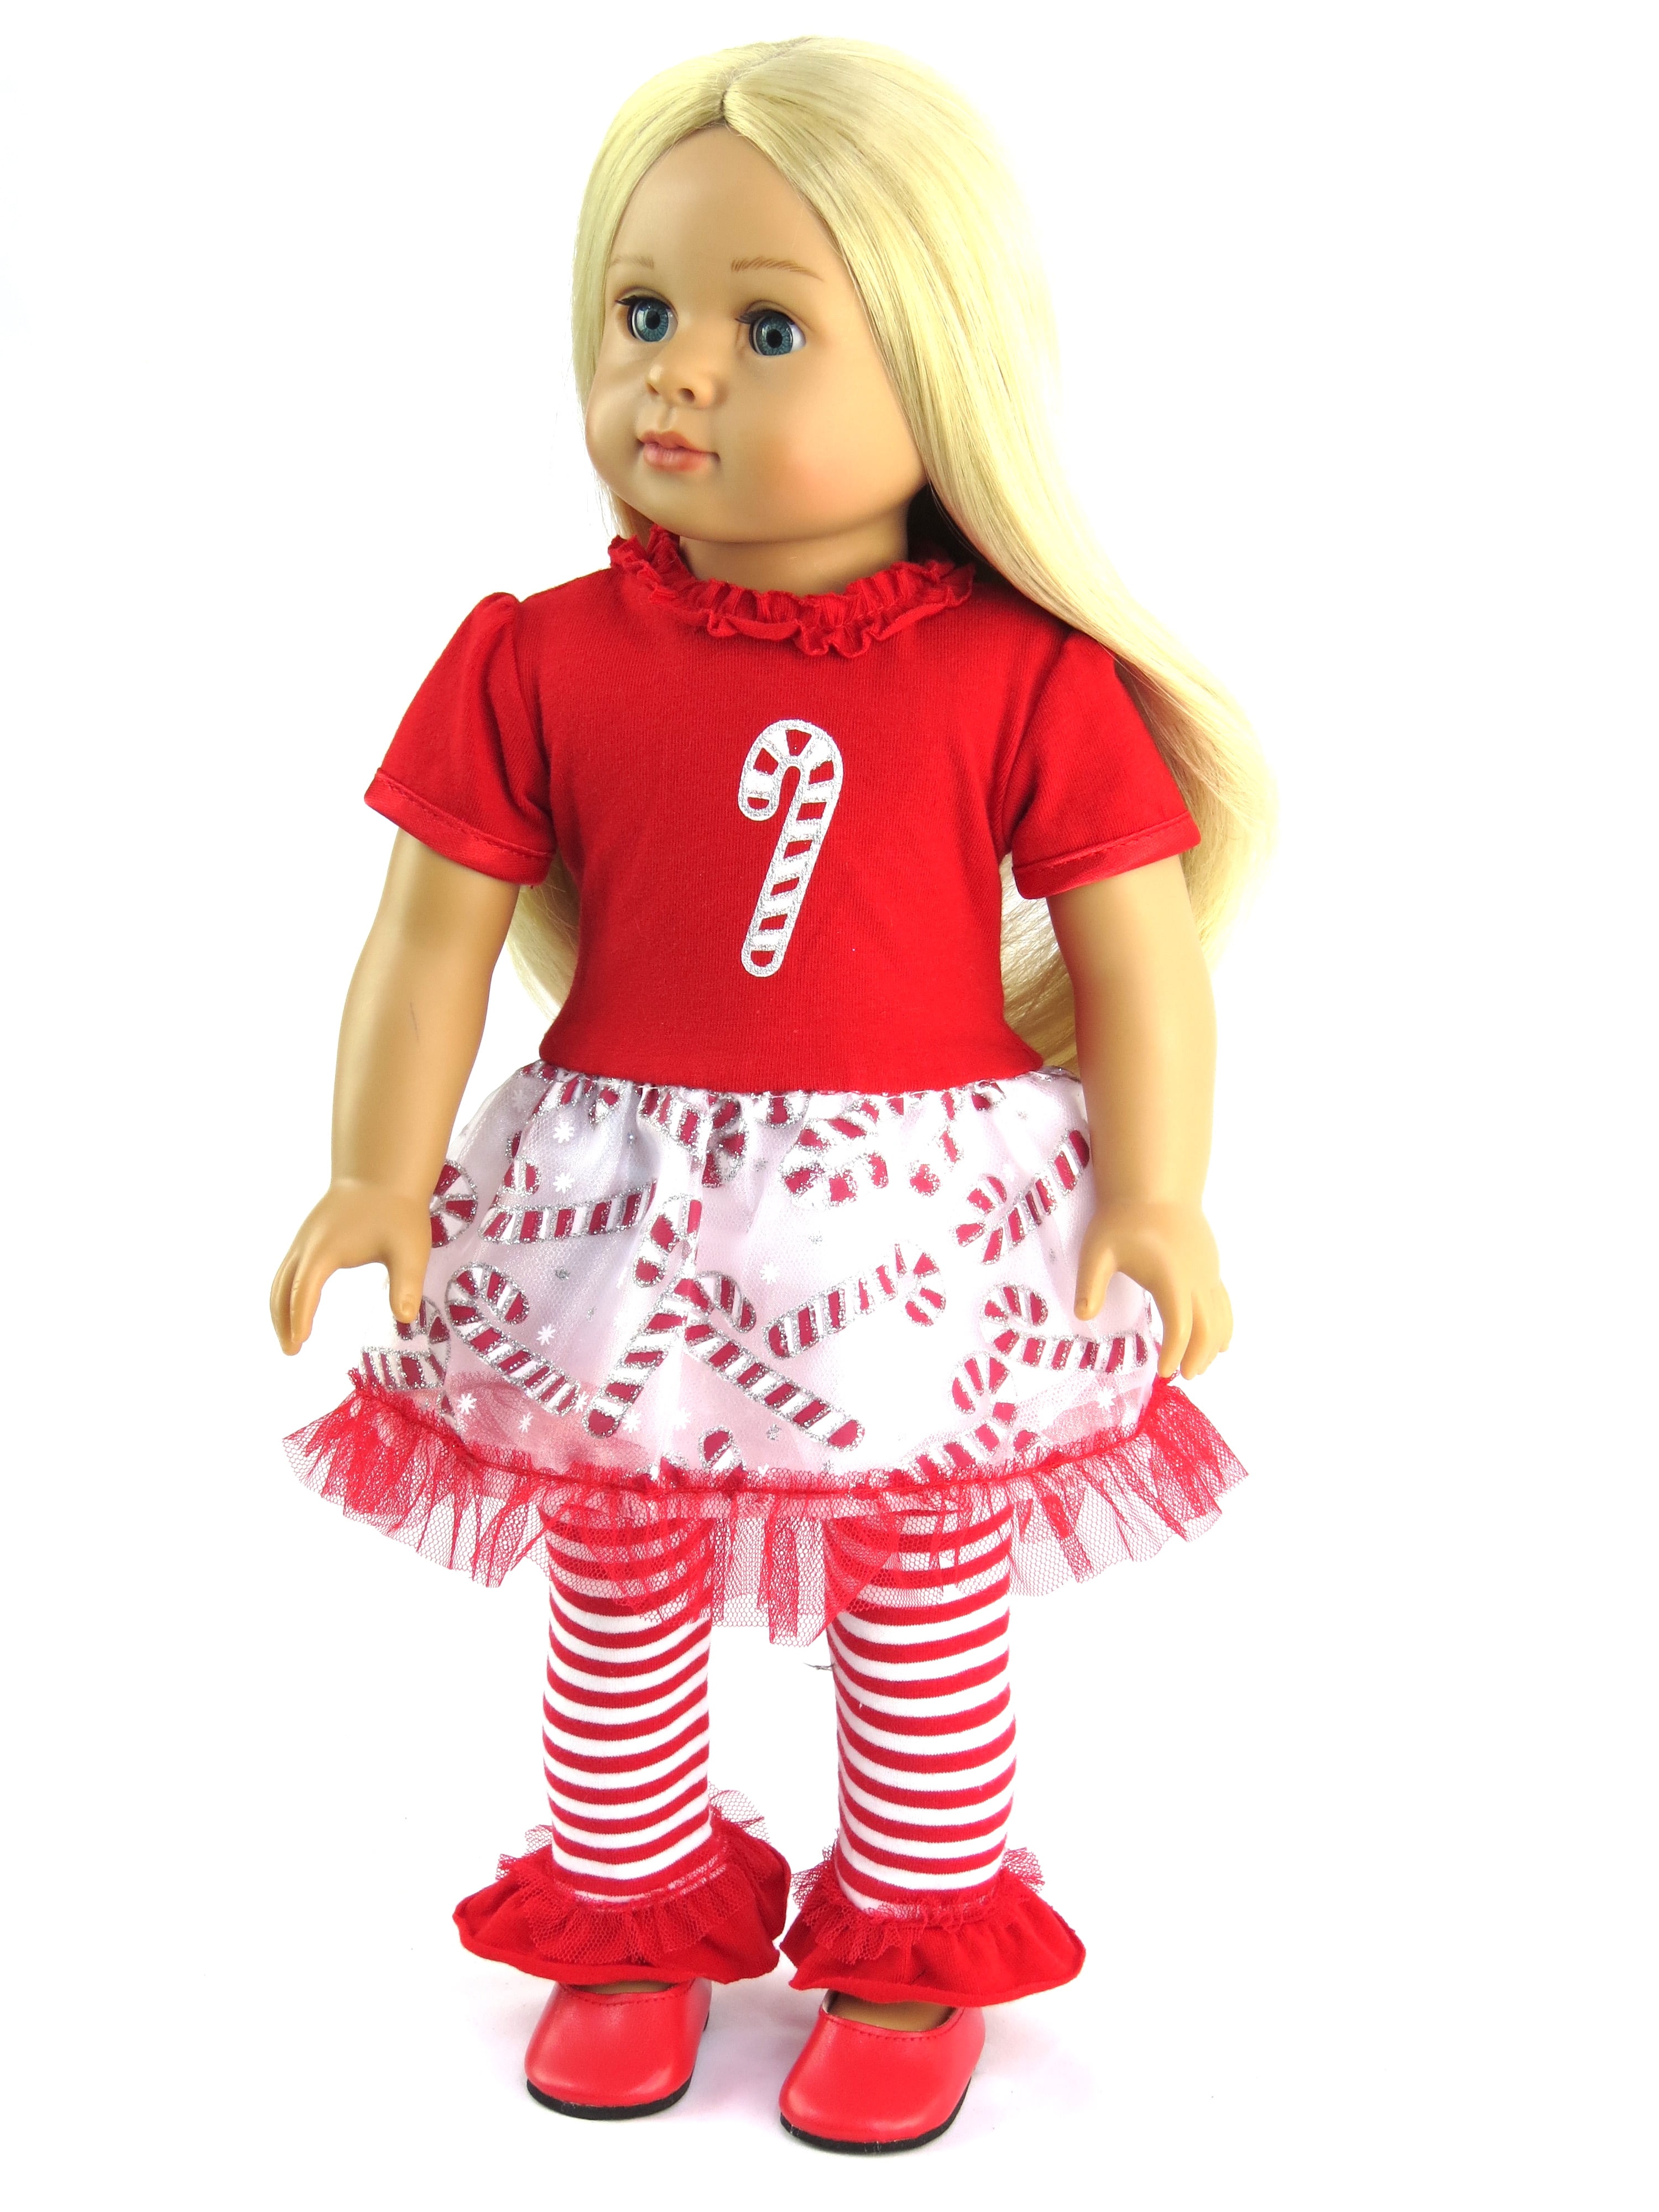 Puppies & Candy Canes Christmas Pajamas for 18" Doll Clothes American Girl 